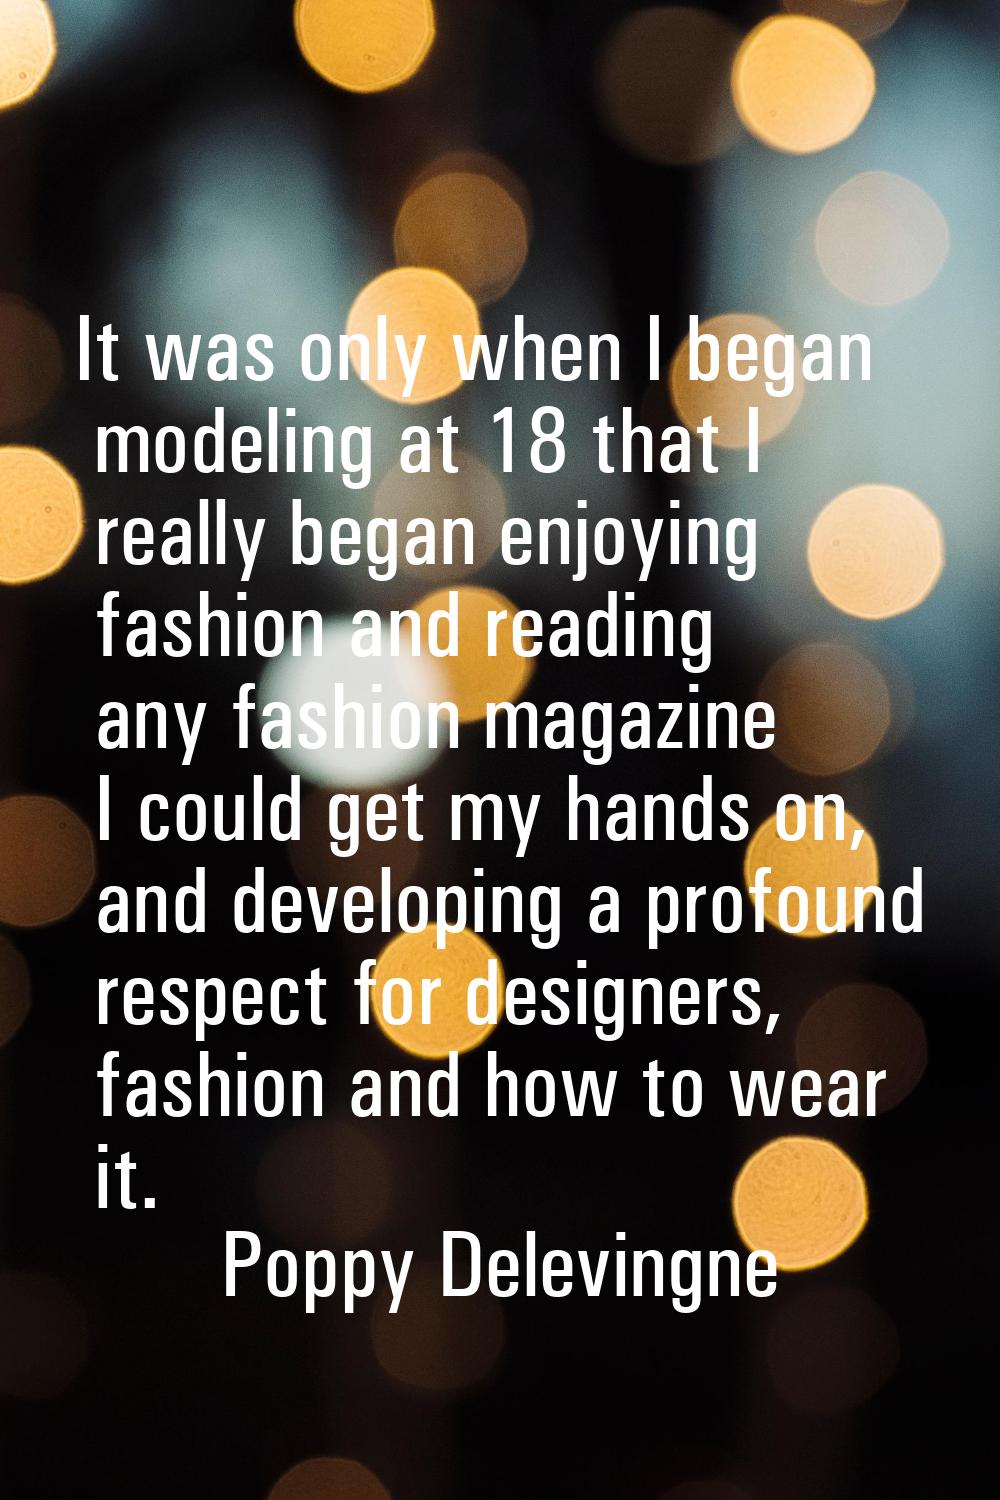 It was only when I began modeling at 18 that I really began enjoying fashion and reading any fashio